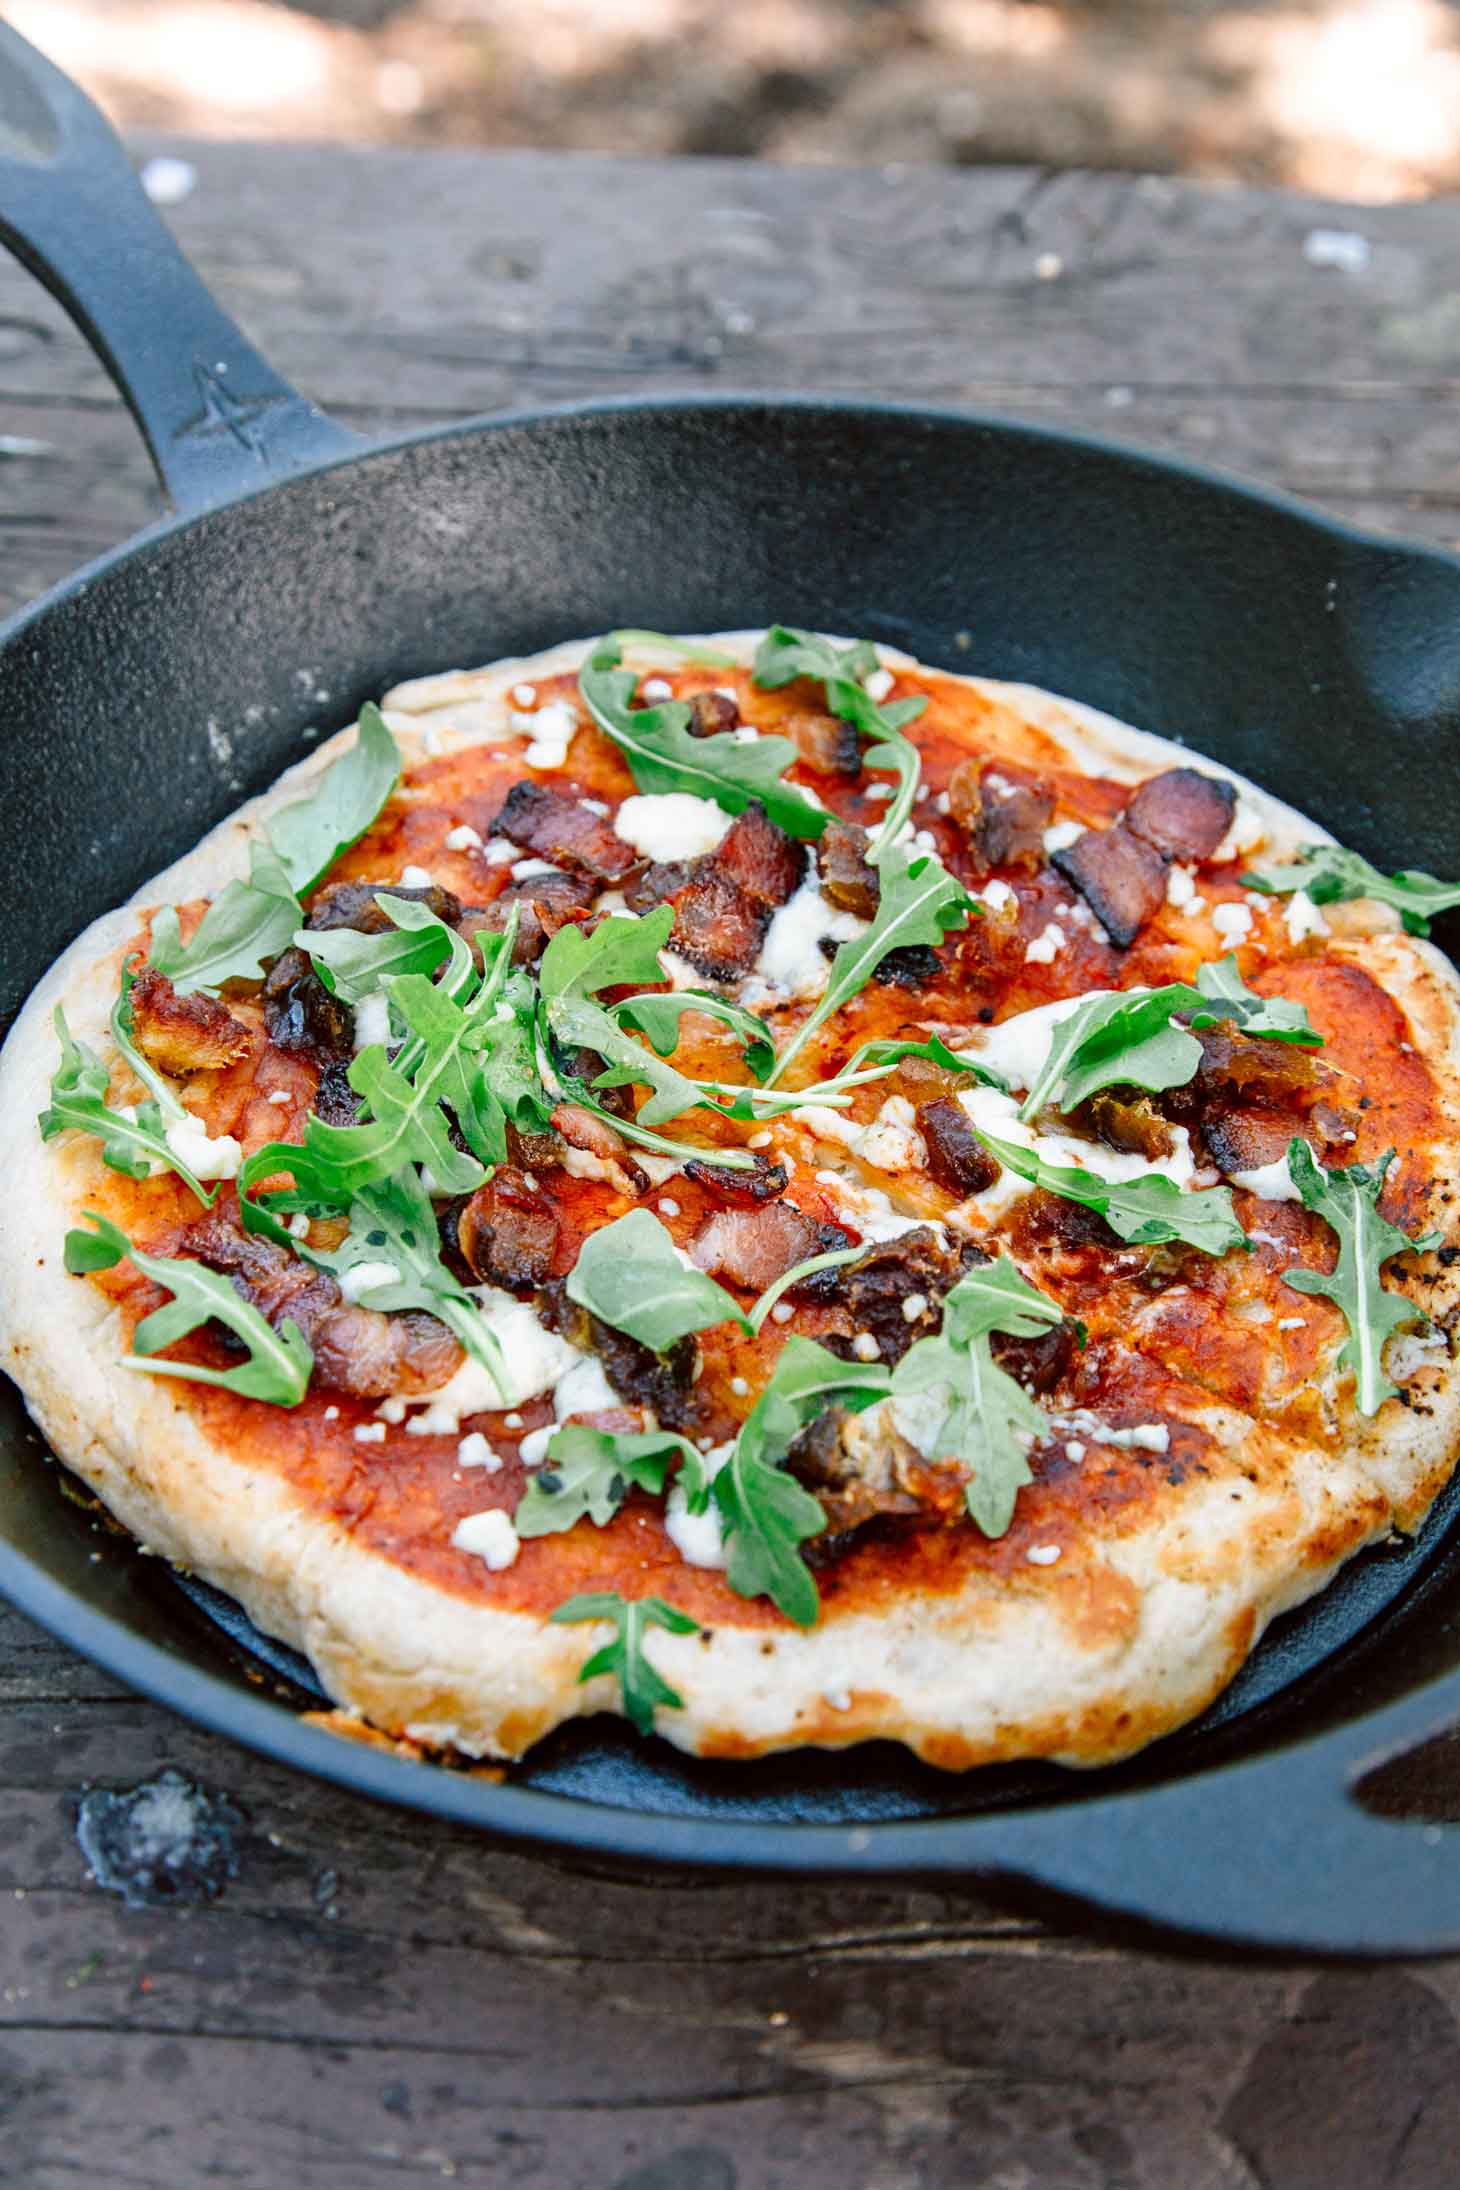 30 Best camping meals ever! A cast iron skillet holding a pizza with bacon, dates and arugula 